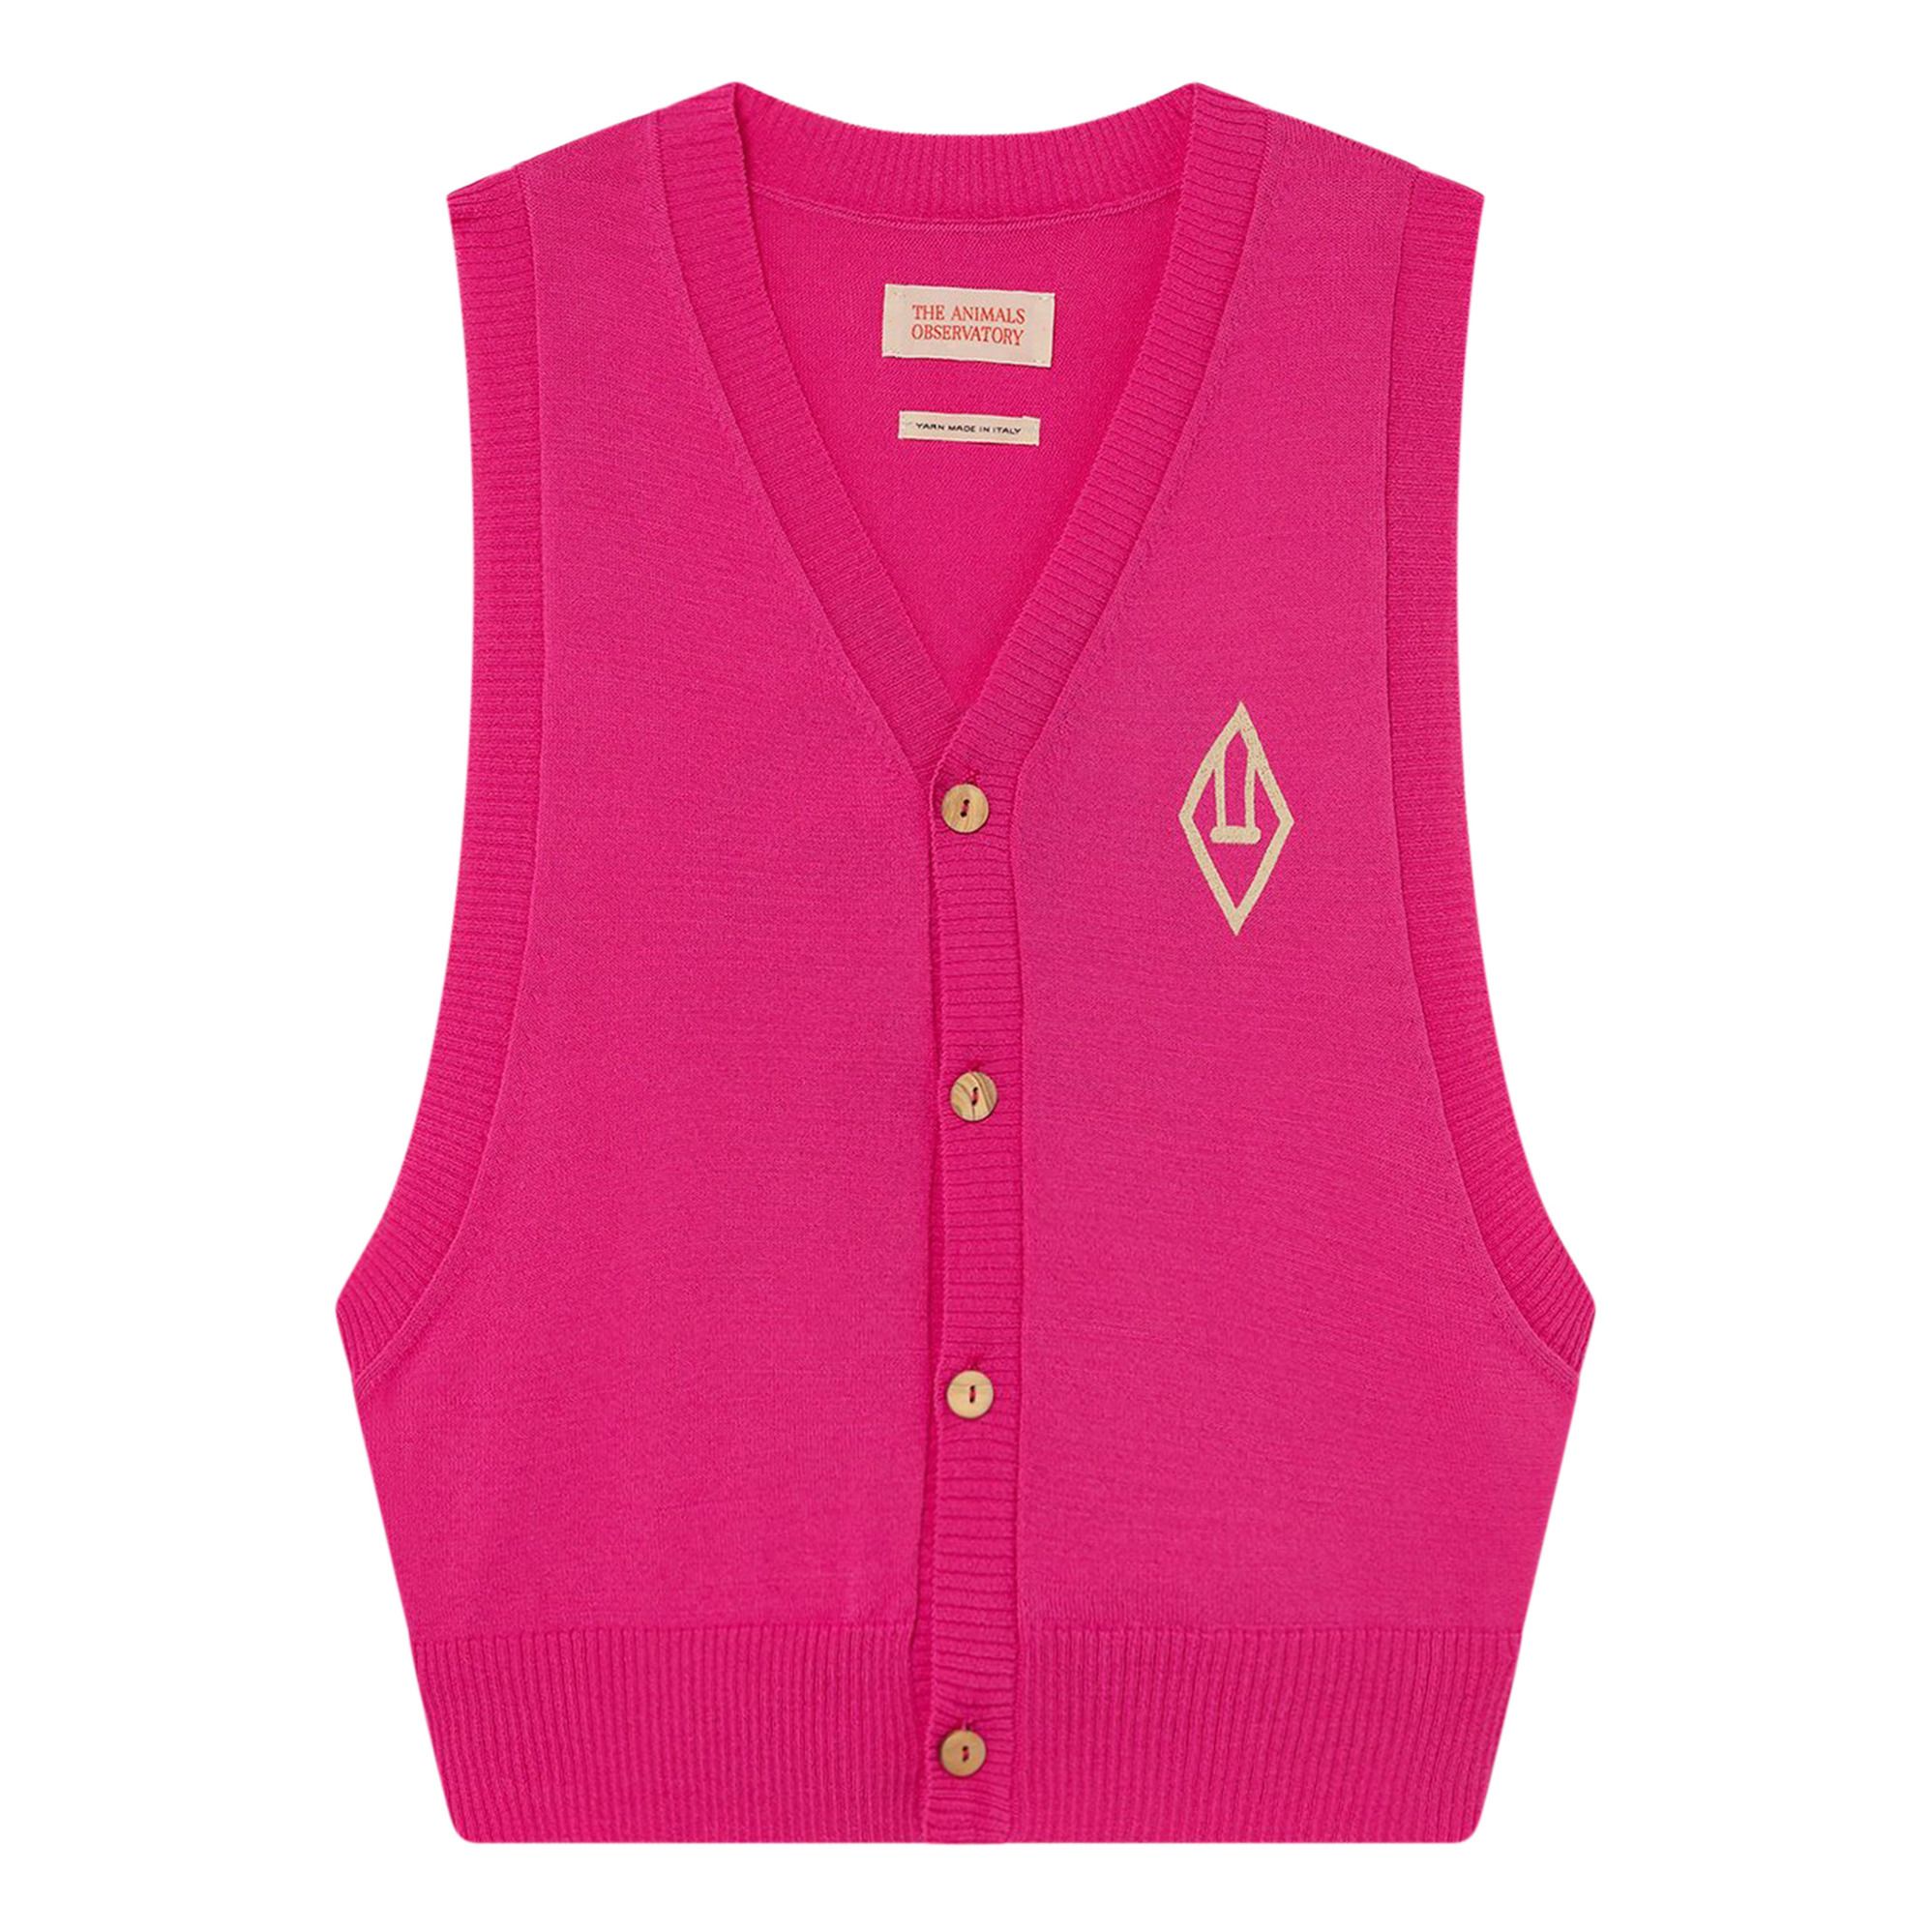 The Animals Observatory - Gilet Palmier Parrot - Fille - Rose fuschia